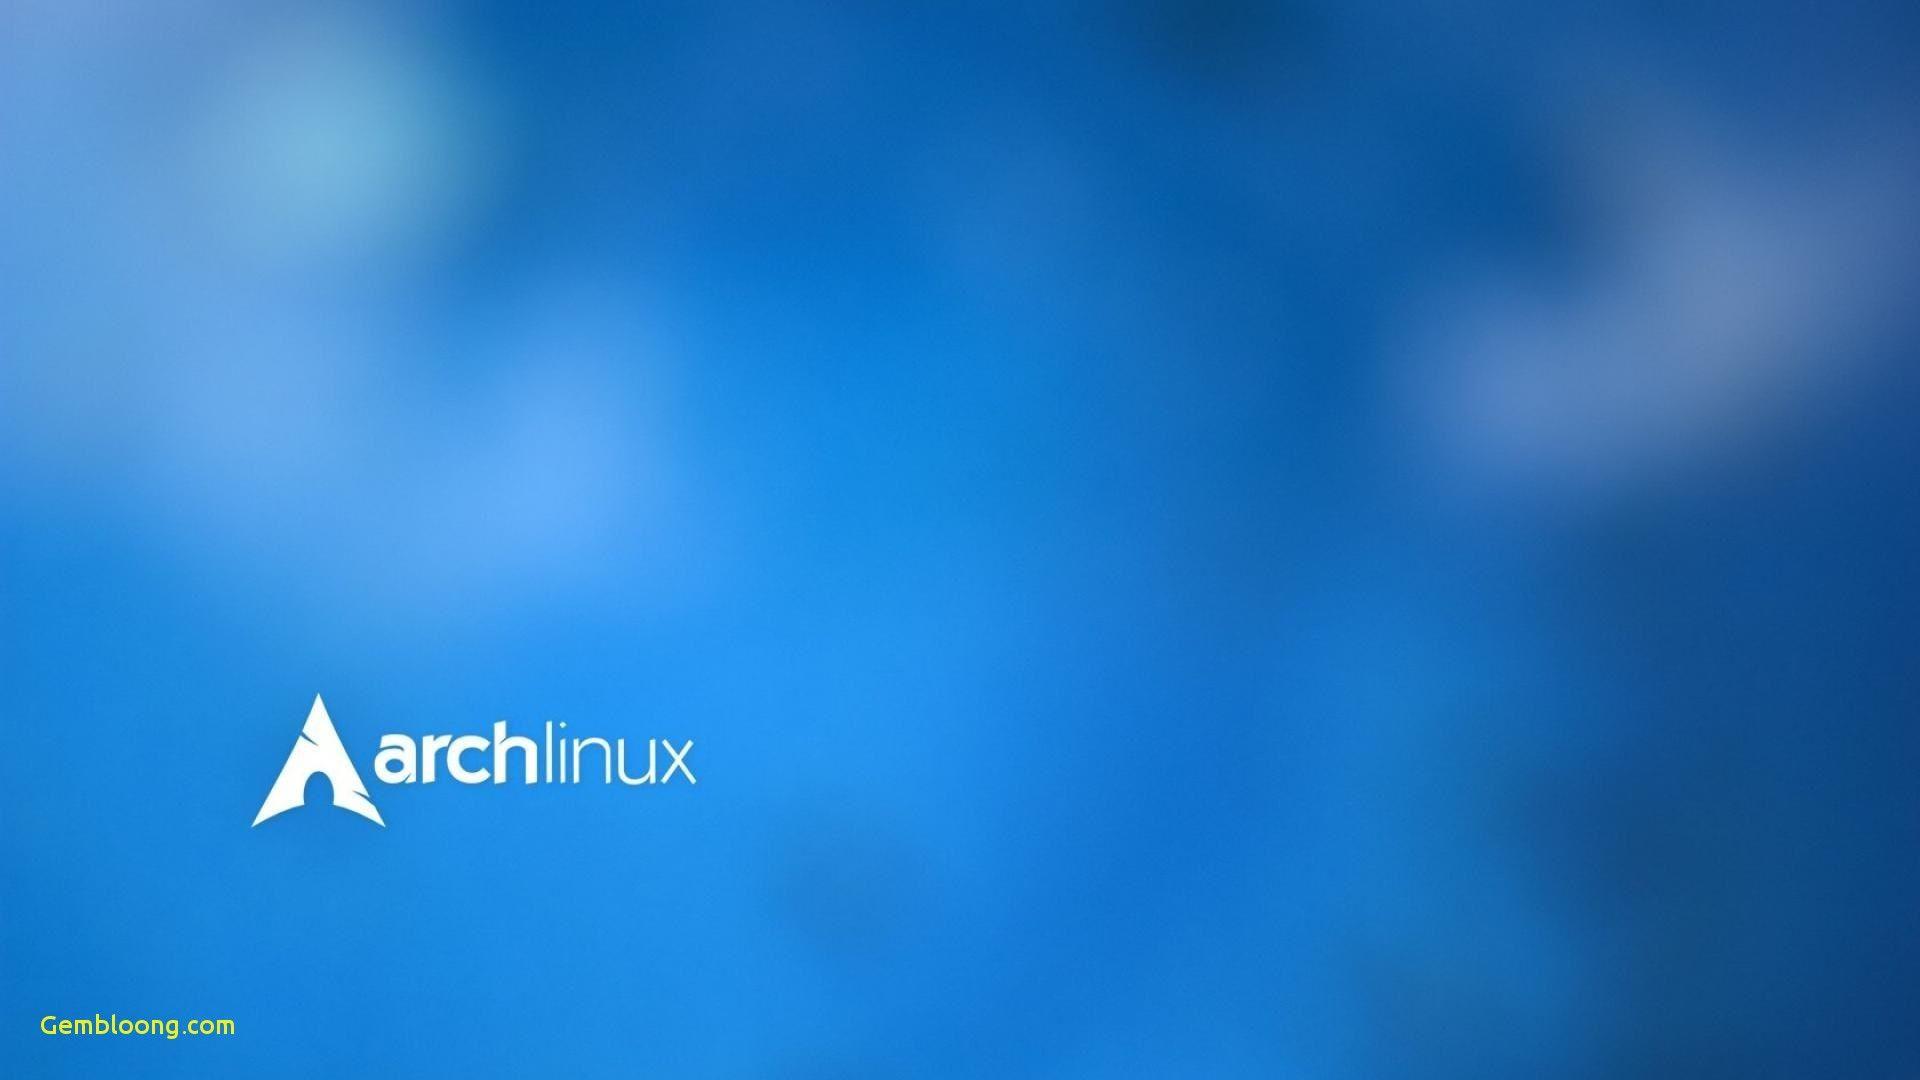 Amazing Wallpaper Background Fresh Arch Linux Background Full HD